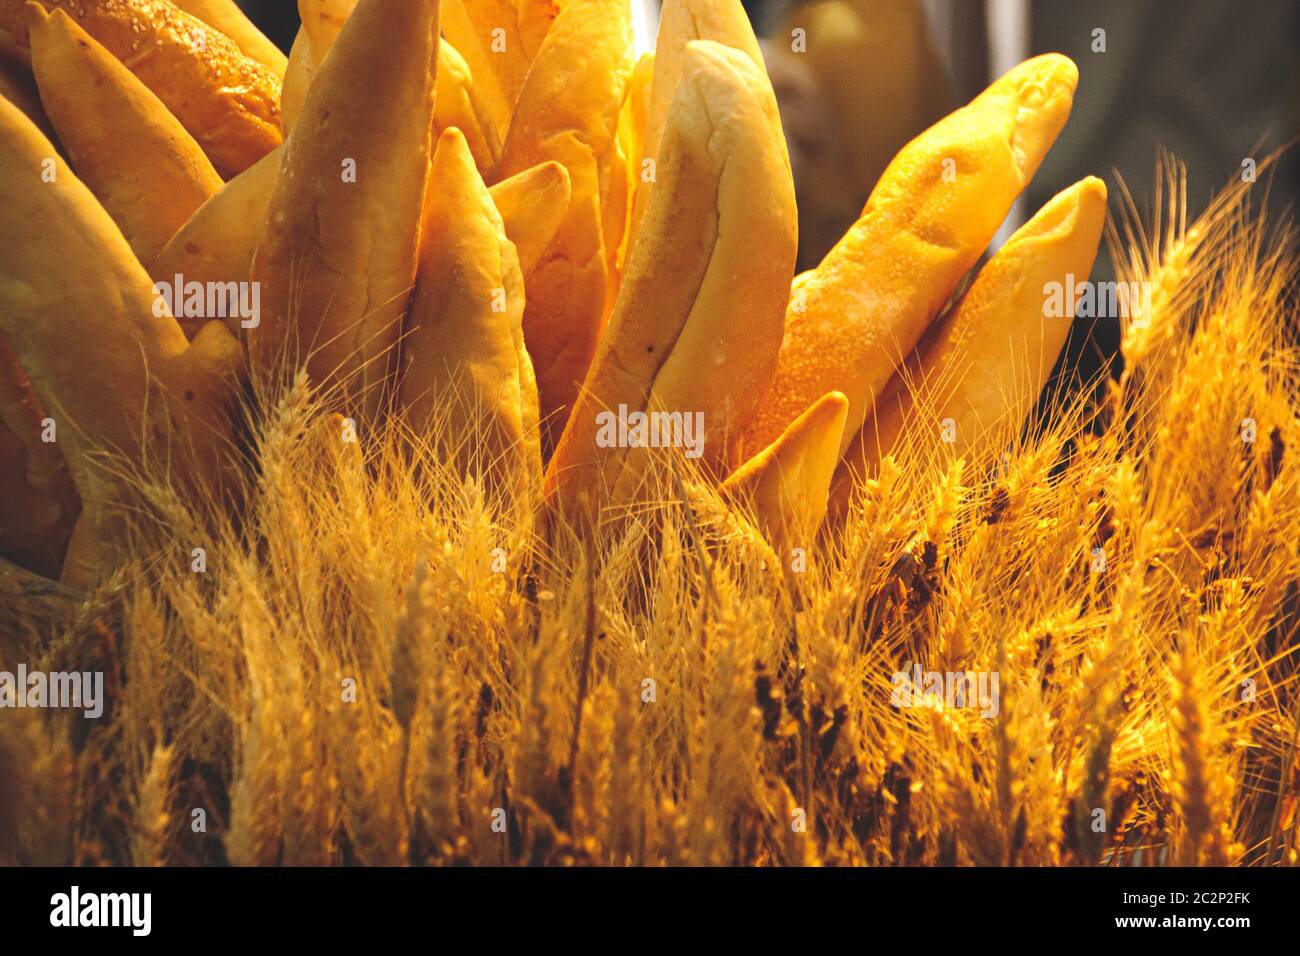 Baguette bread and wheat plant to show concept of Autumn harvest, Agriculture and Plant based food Stock Photo